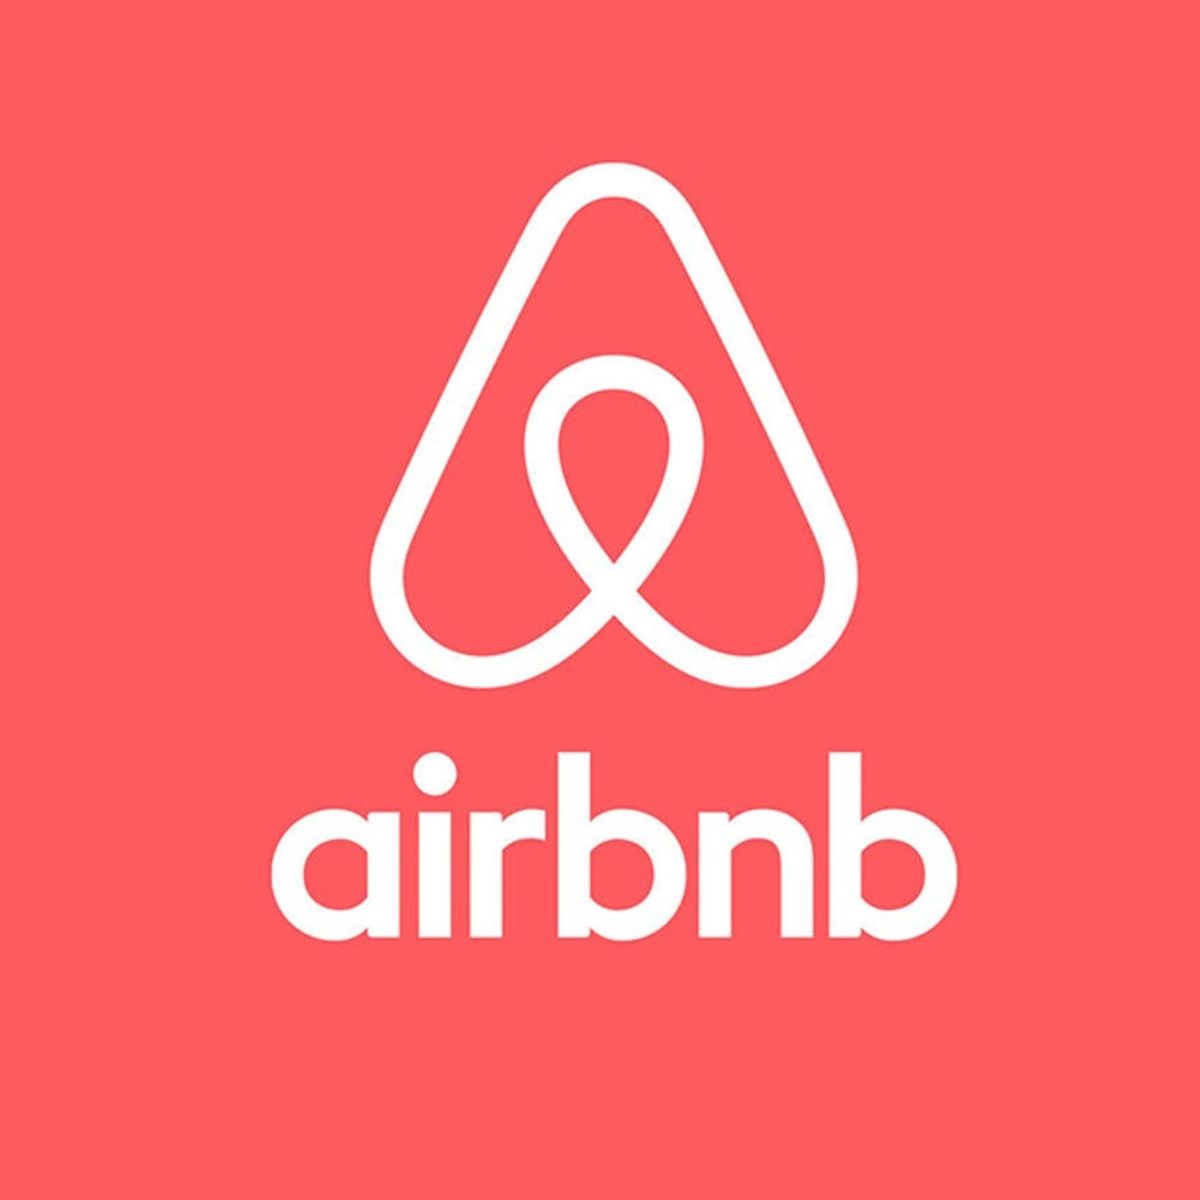 The Reason This Airbnb User Was Denied Will Infuriate You